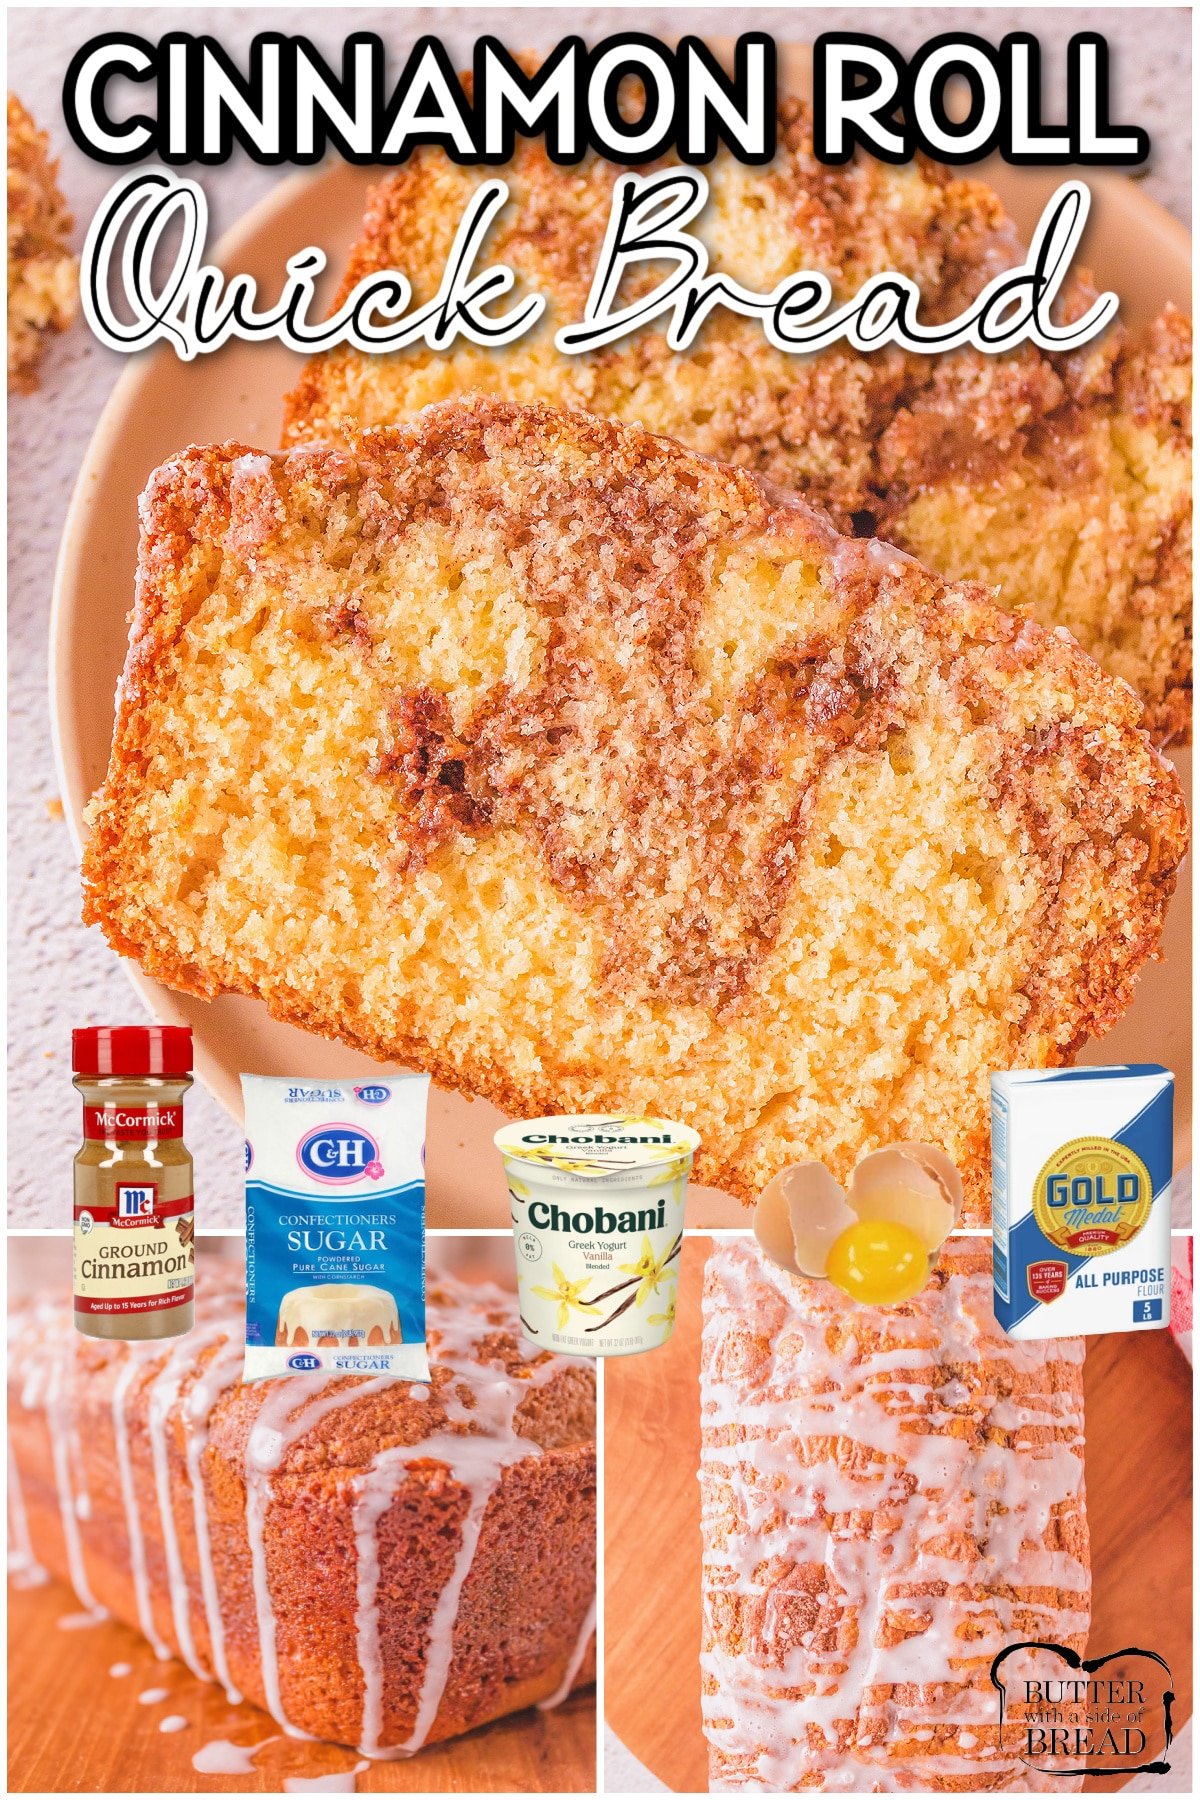 Easy Cinnamon Roll Quick Bread has all the delicious cinnamon roll flavors in an easy no-yeast bread recipe! Sweet  bread batter swirled with cinnamon sugar and topped with a simple vanilla glaze.